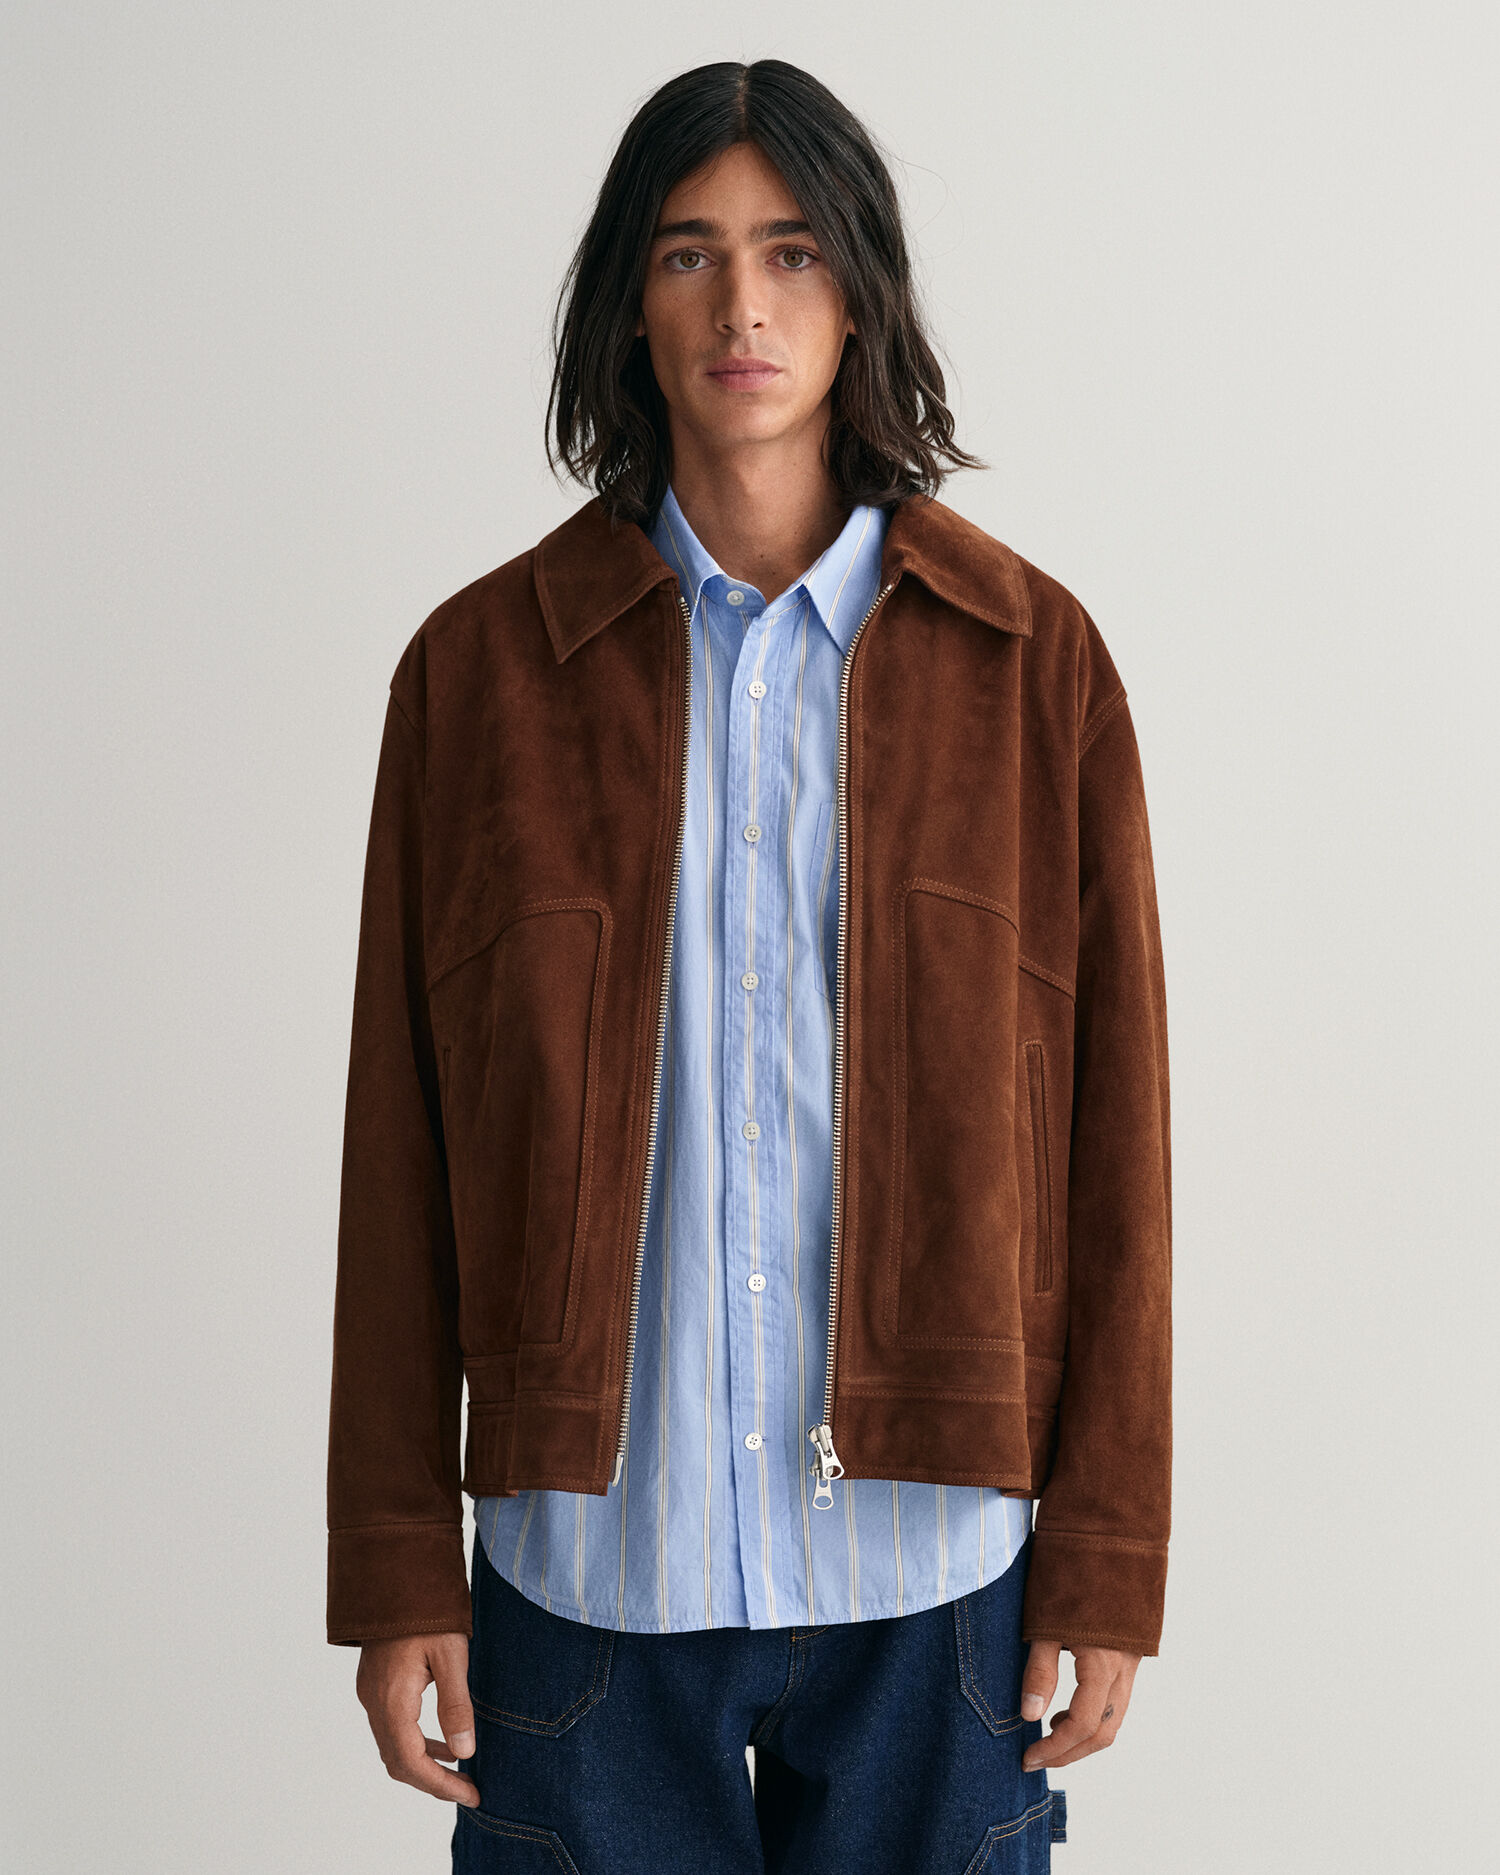 May I Per-Suede You: Suede Jackets : r/malefashionadvice